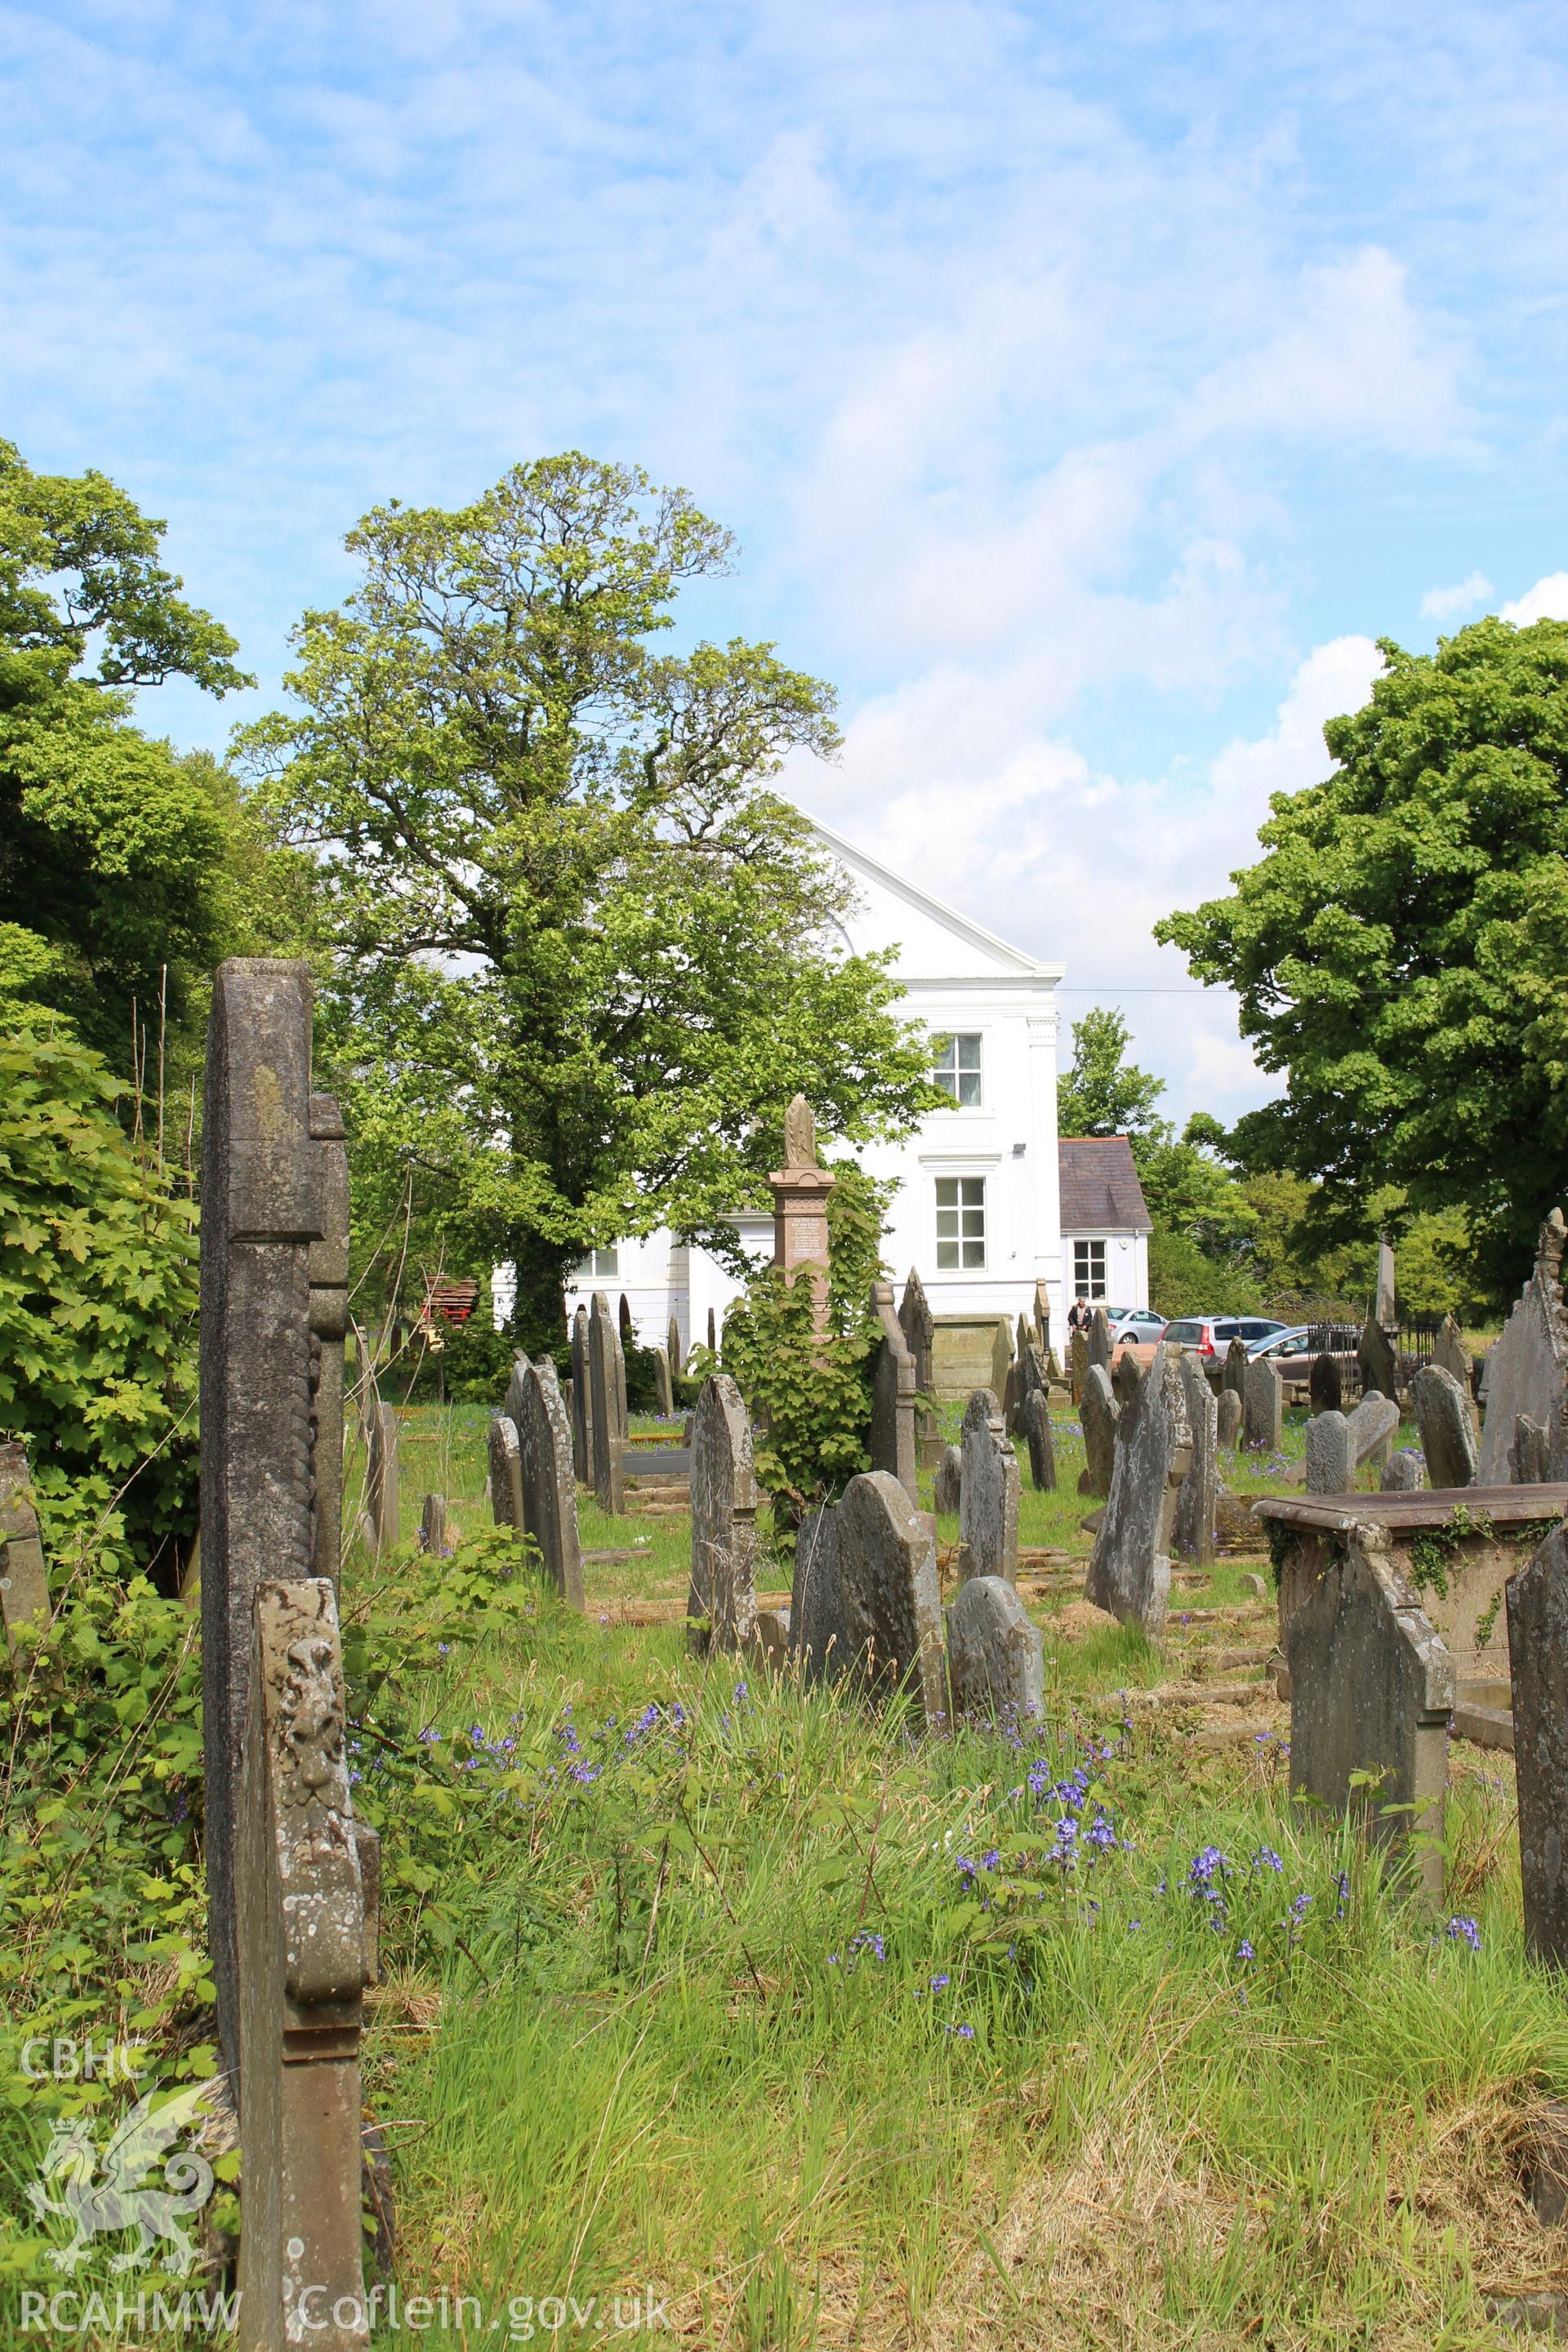 Colour photograph of graveyard and front facade of Mynydd-Bach Independent Chapel, Treboeth, Swansea, taken during photographic survey conducted by Sue Fielding on 13th May 2017.